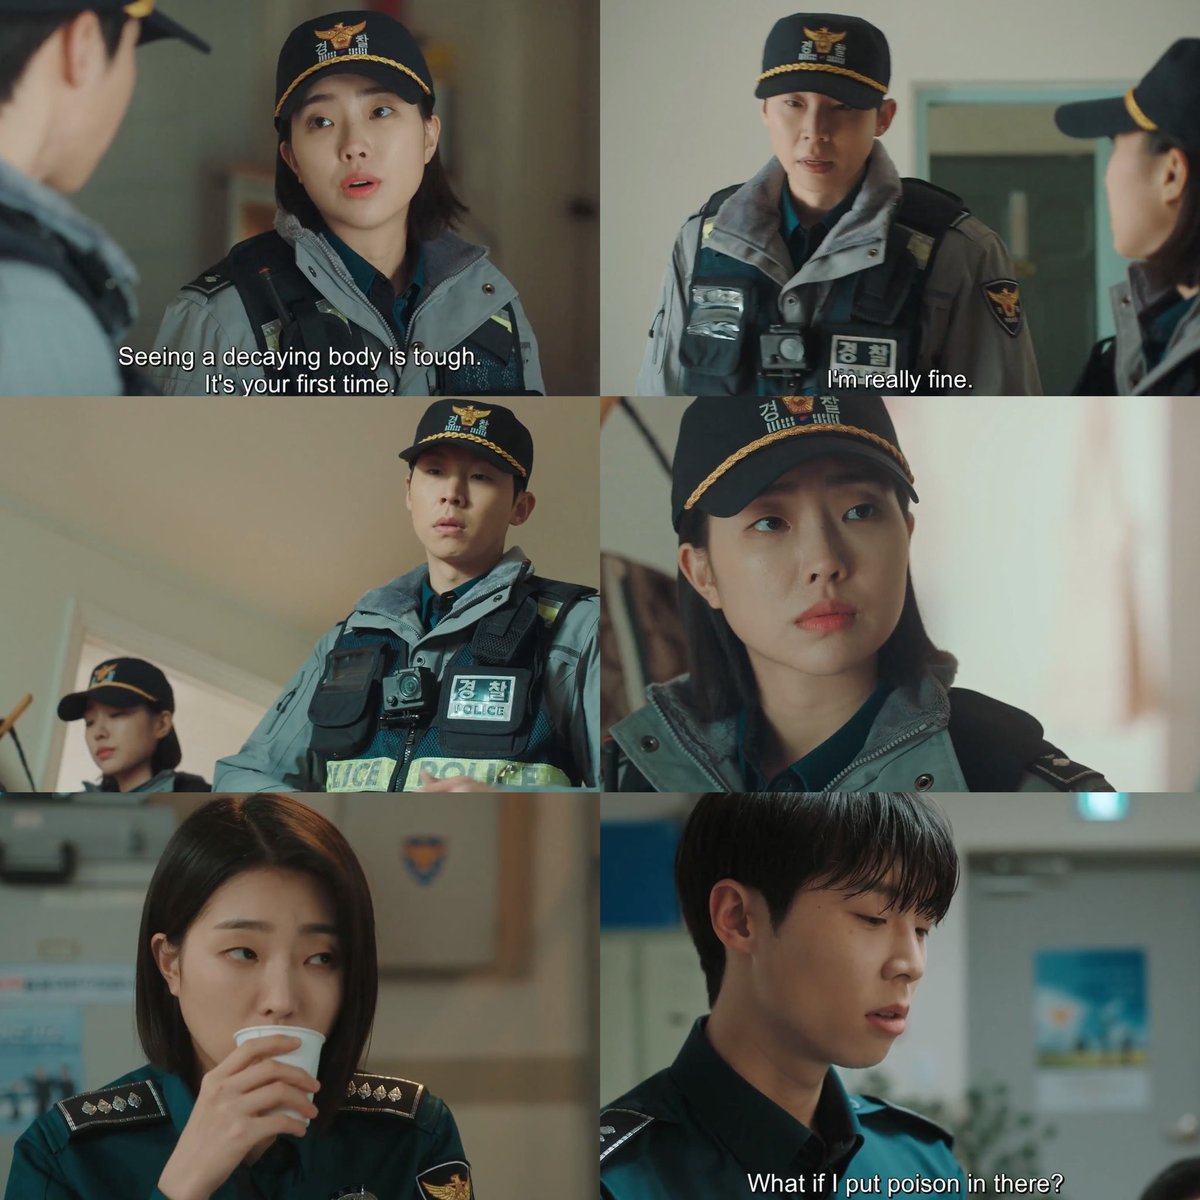 AHHHH! Why is he so suspicious?! Minjo’s looking at him suspiciously as well. 😳

#Link #LinkEp2 #LinkEatLoveKill #LeeBomSori #SongDukho